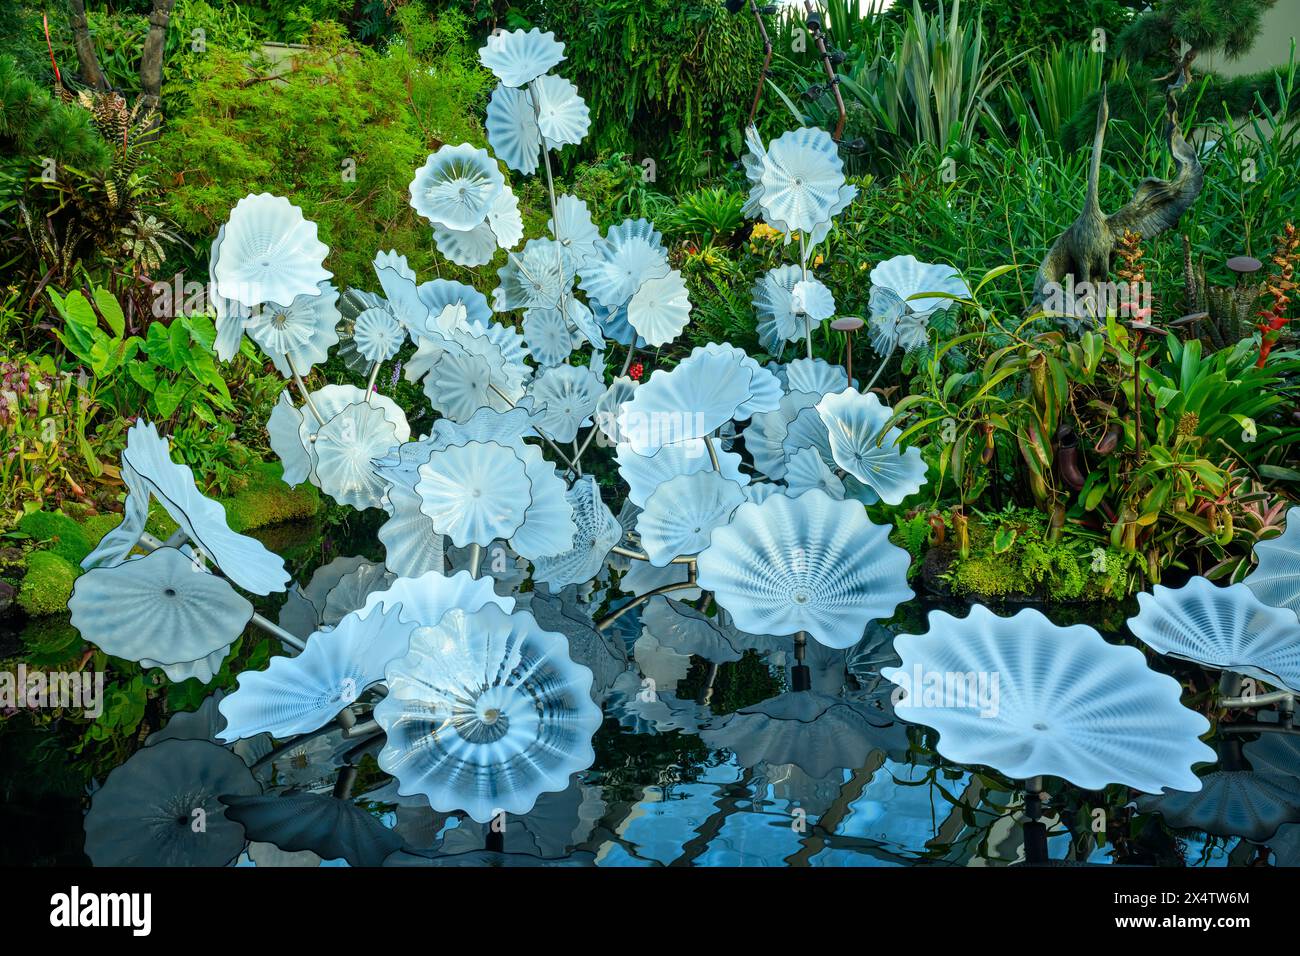 The Ethereal White Persians at the Cloud Forest, Gardens By the Bay, Singapore Stock Photo